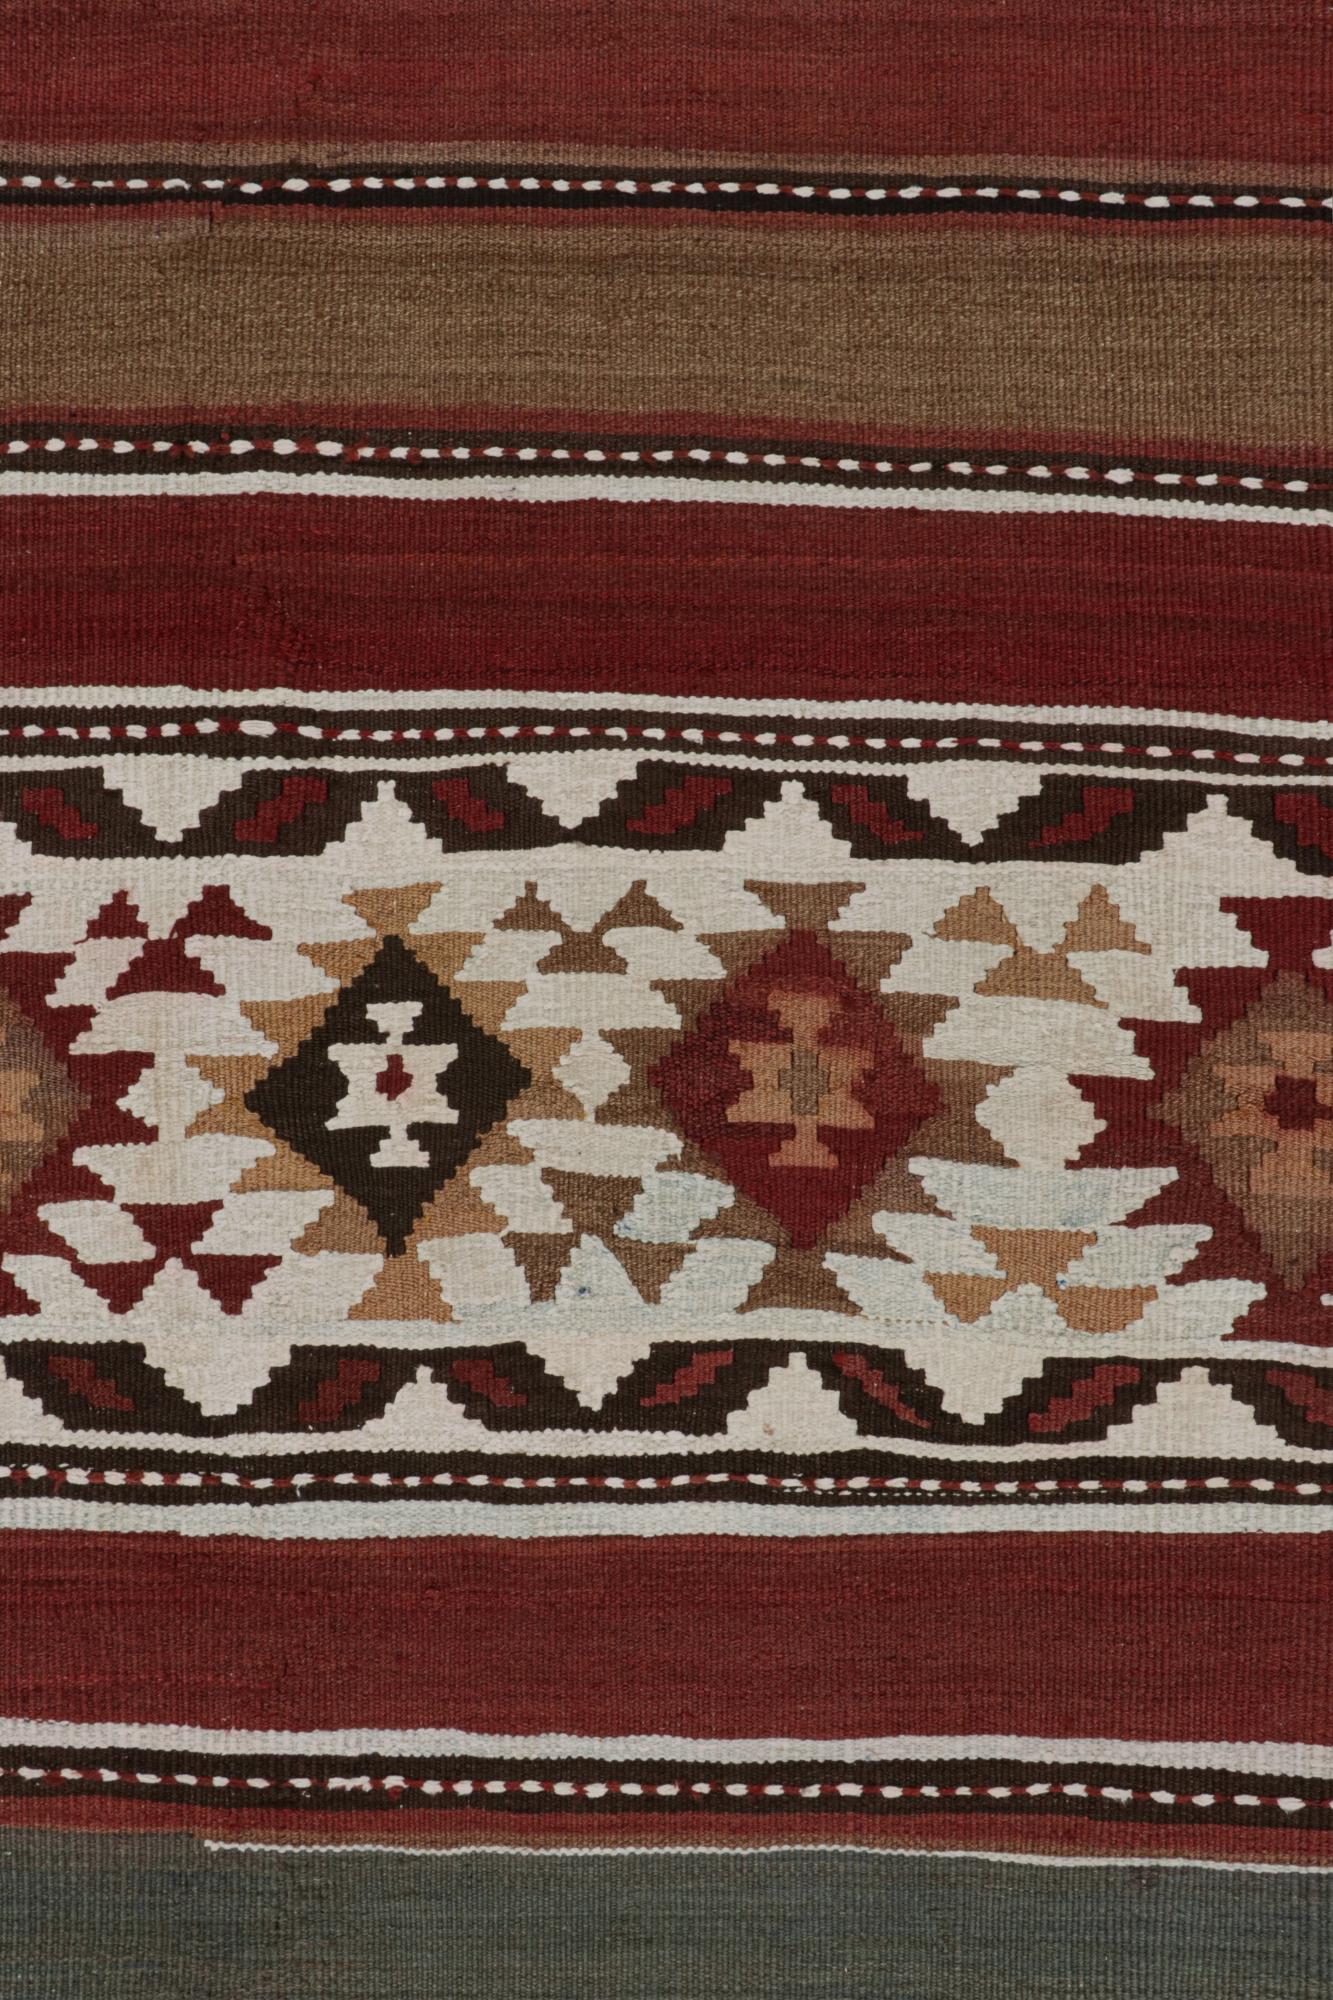 Tribal Vintage Shahsavan Persian Kilim in Red, White and Beige-Brown Geometric Patterns For Sale